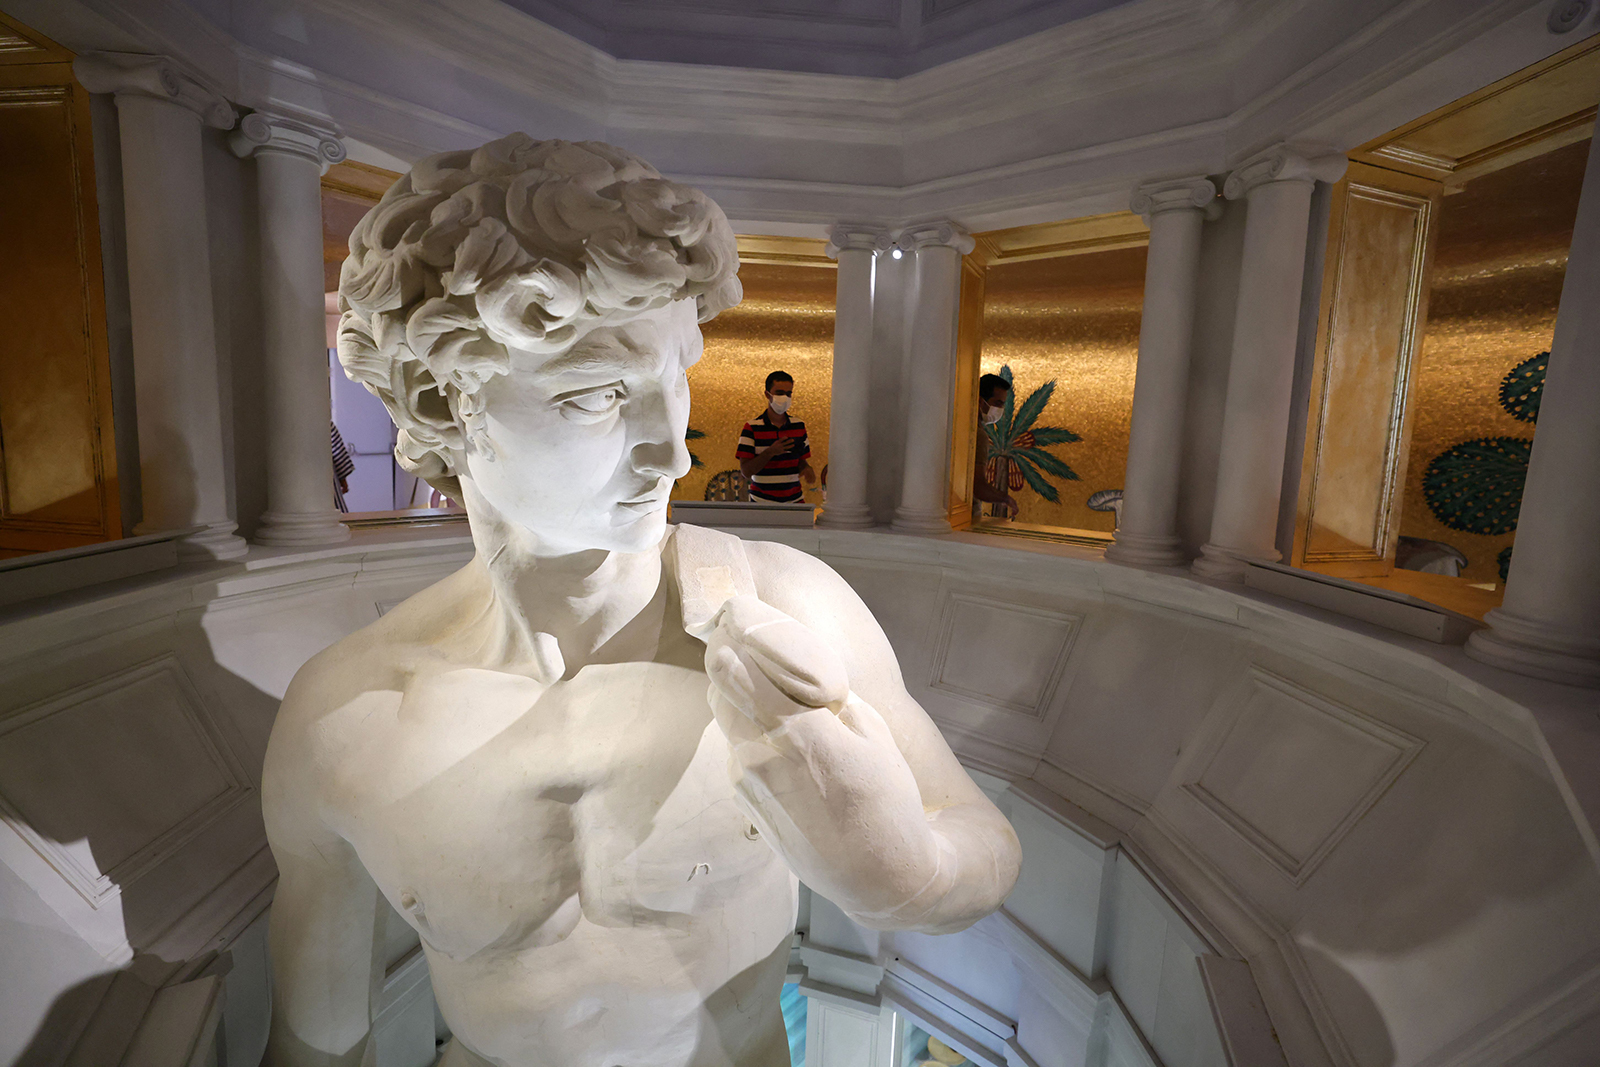 A giant replica of Michelangelo's David is pictured inside the Italian pavilion.